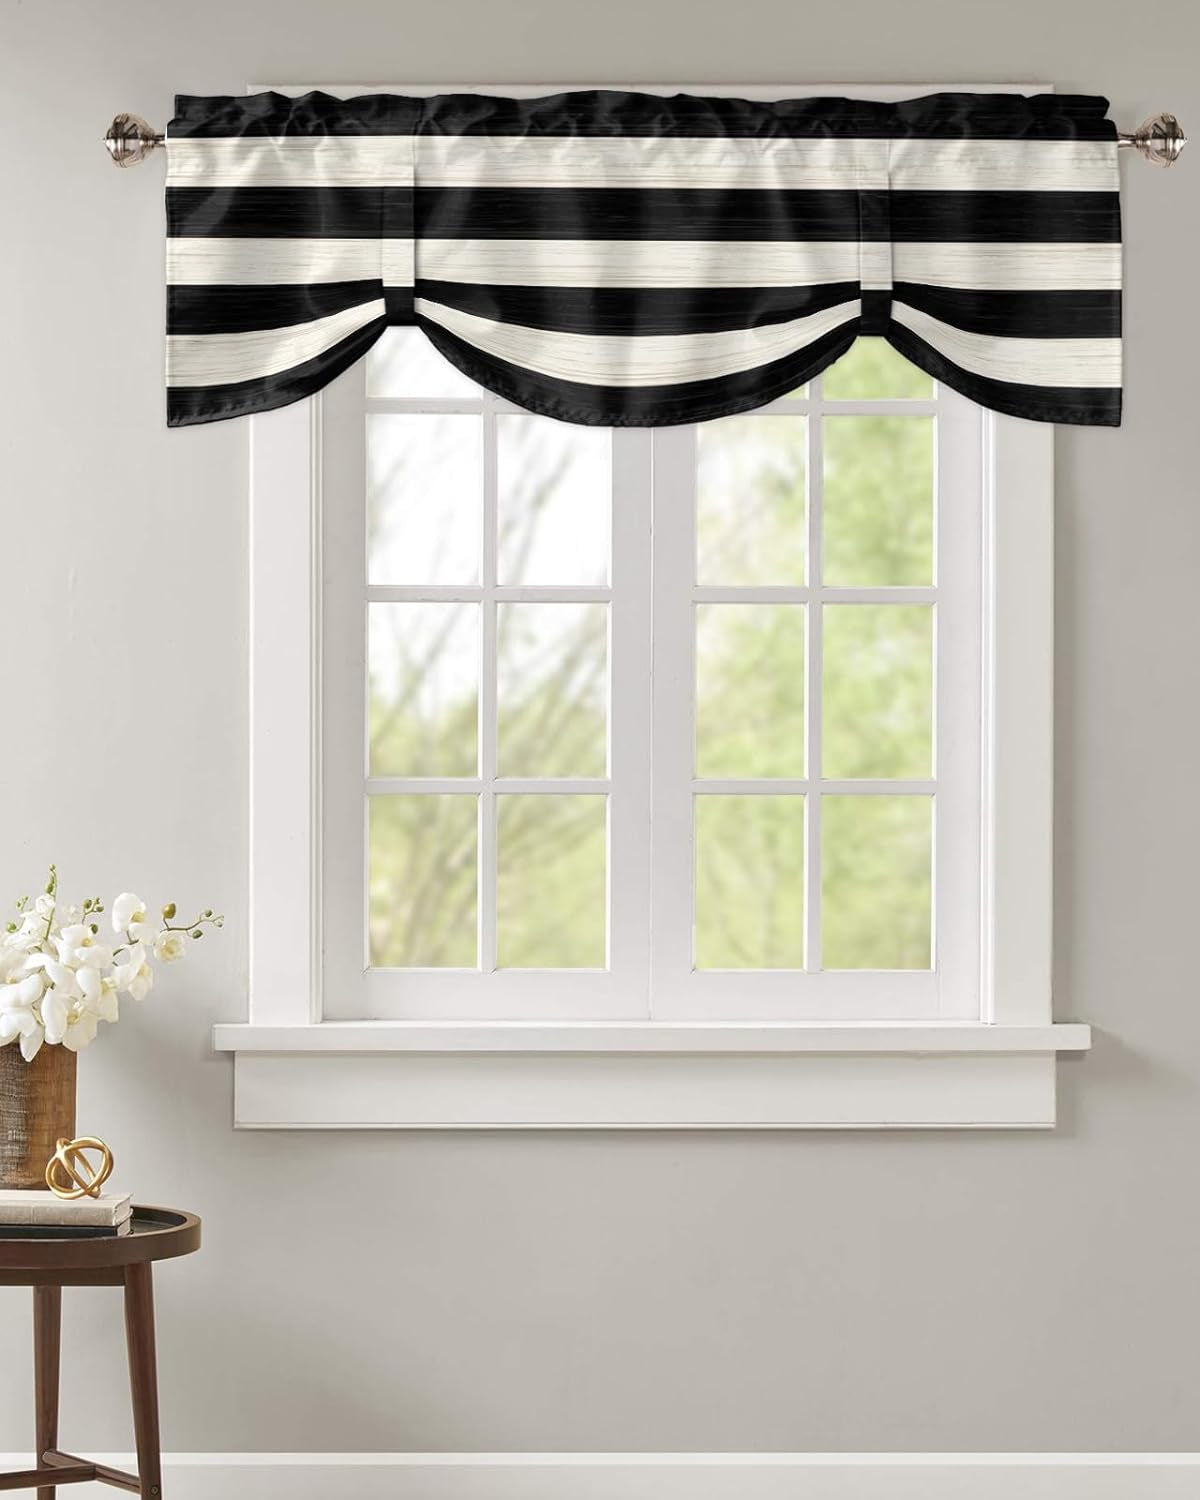 Black and White Stripe Tie up Curtain Valance Window Topper 1 Panel 42X18In,Wood Board Texture Adjustable Rod Pocket Short Window Shade Valances for Kitchen Bedroom Windows